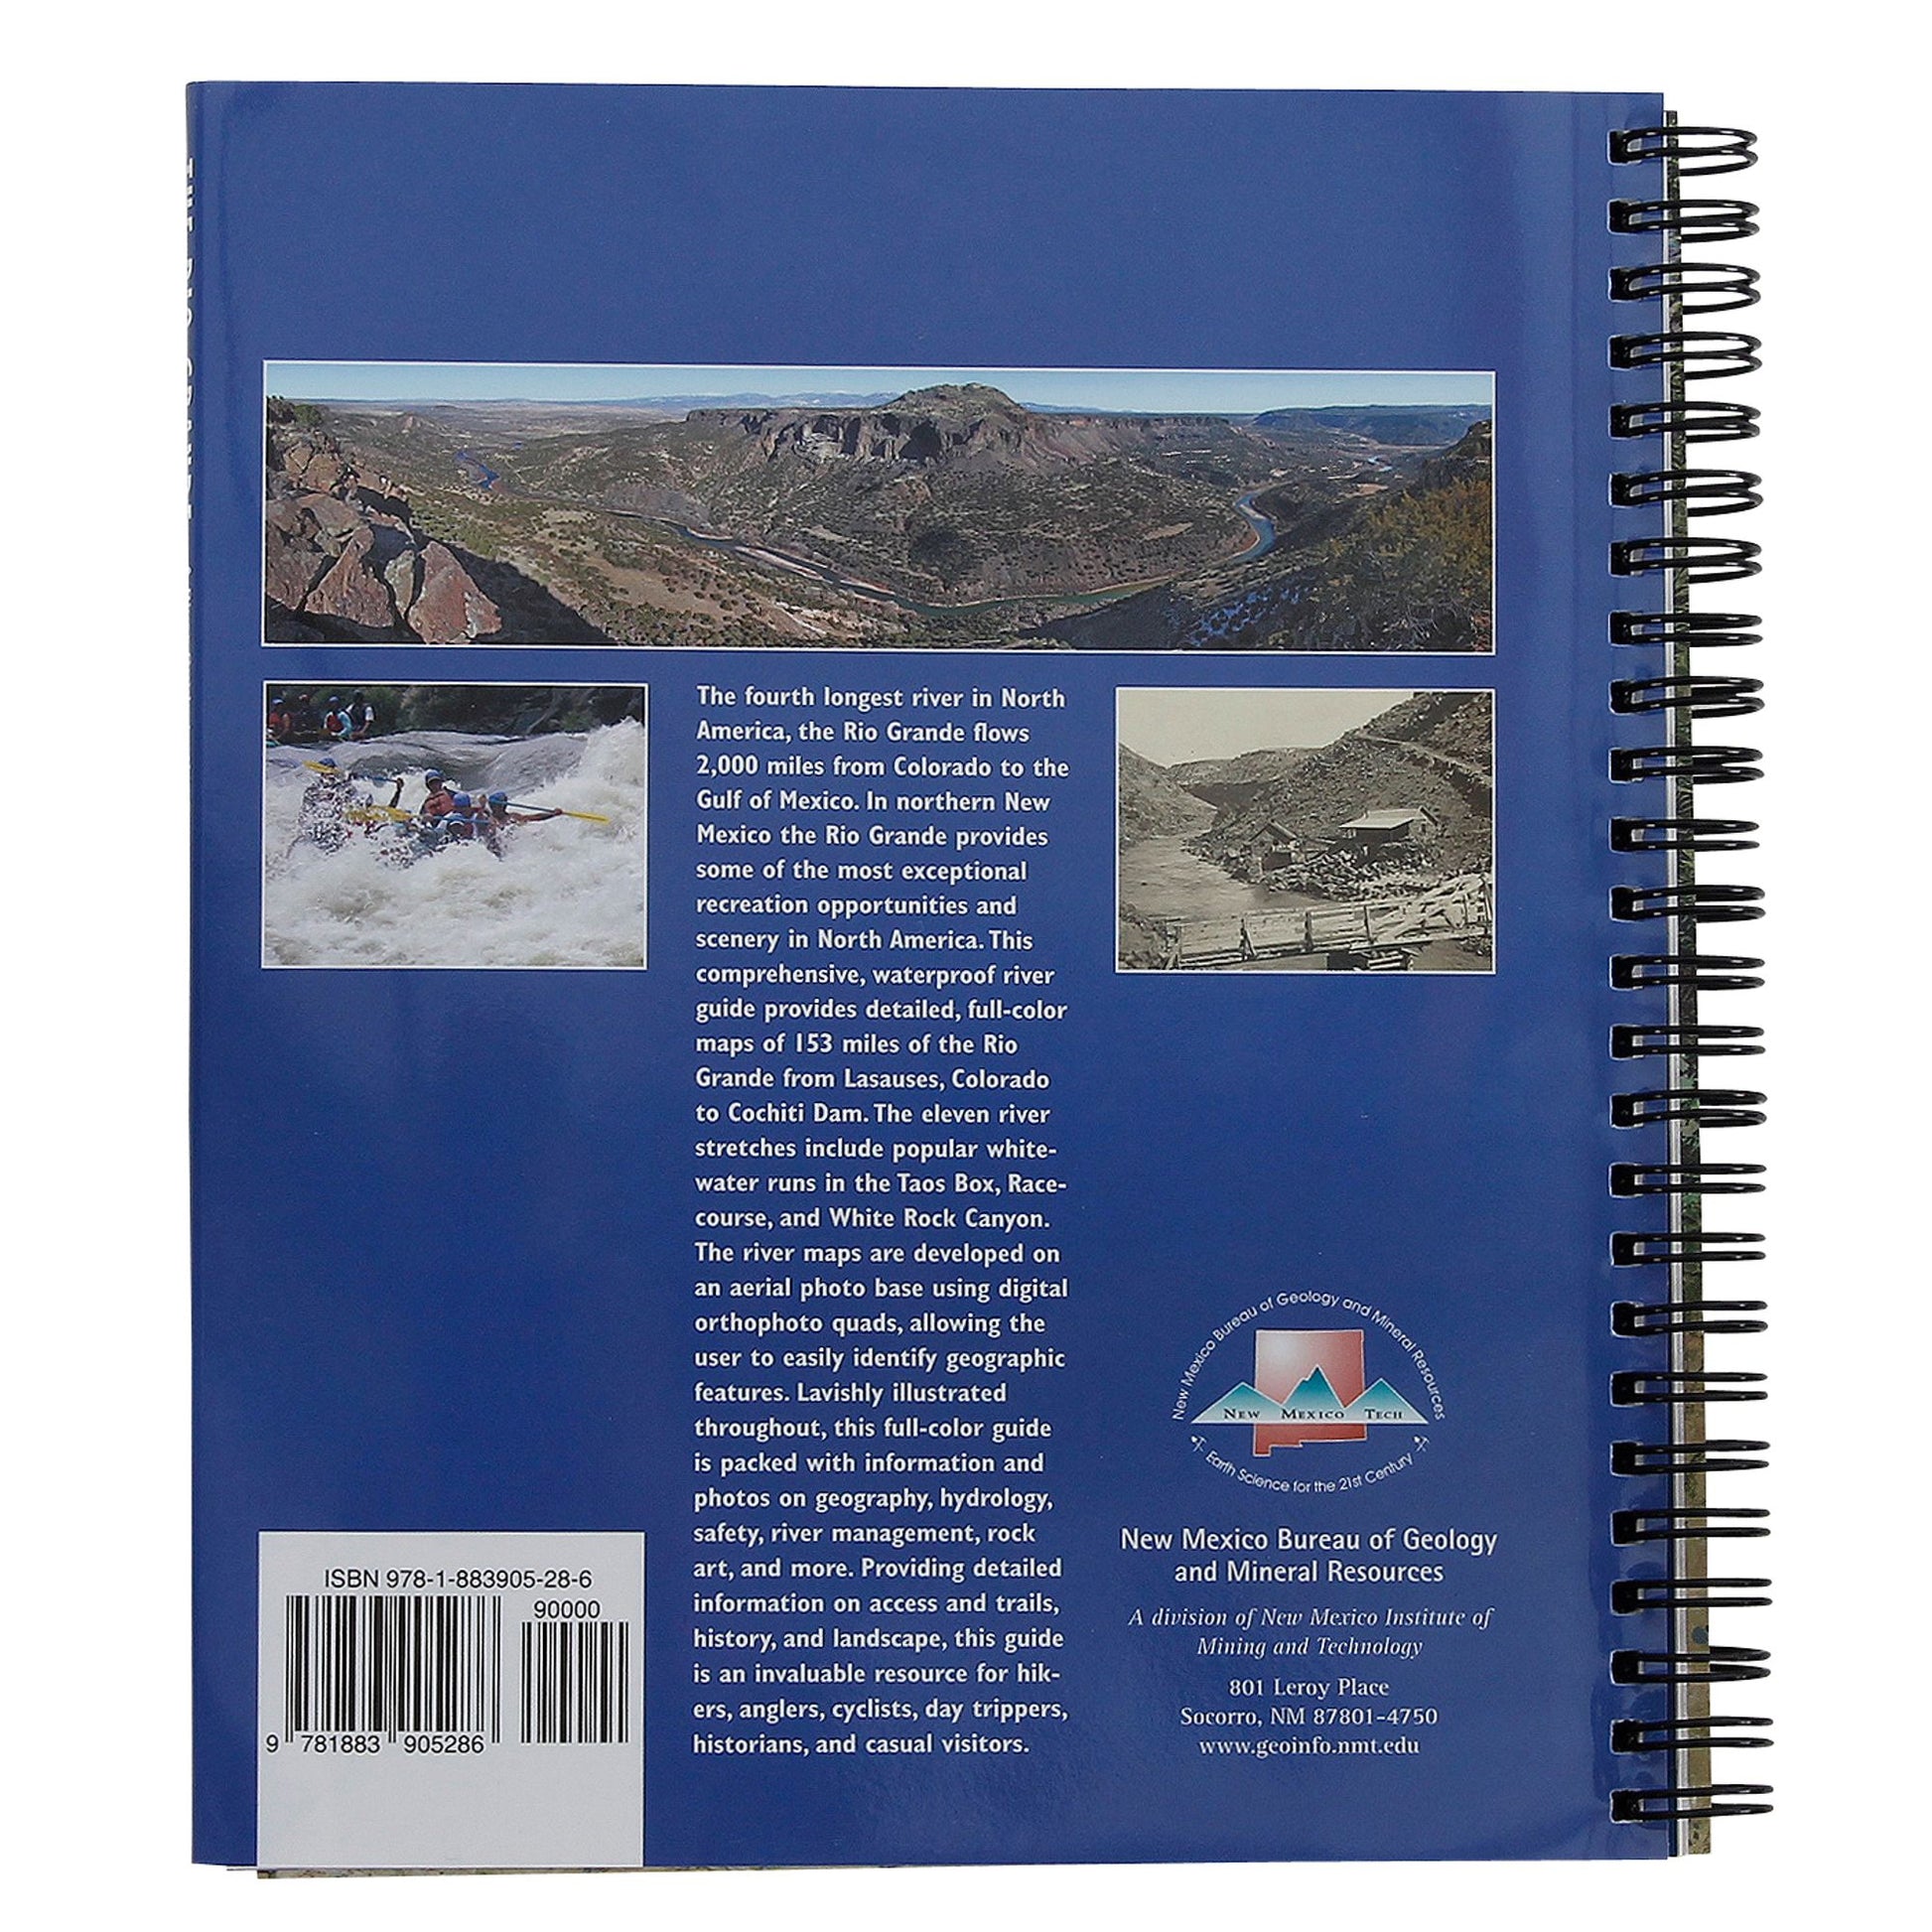 Back cover of a spiral-bound Rio Grande Guide Book with information and images showcasing the geology, history, and outdoor activities related to the Rio Grande River Guide from New Mexico Bureau of Geology & Mineral Resources.